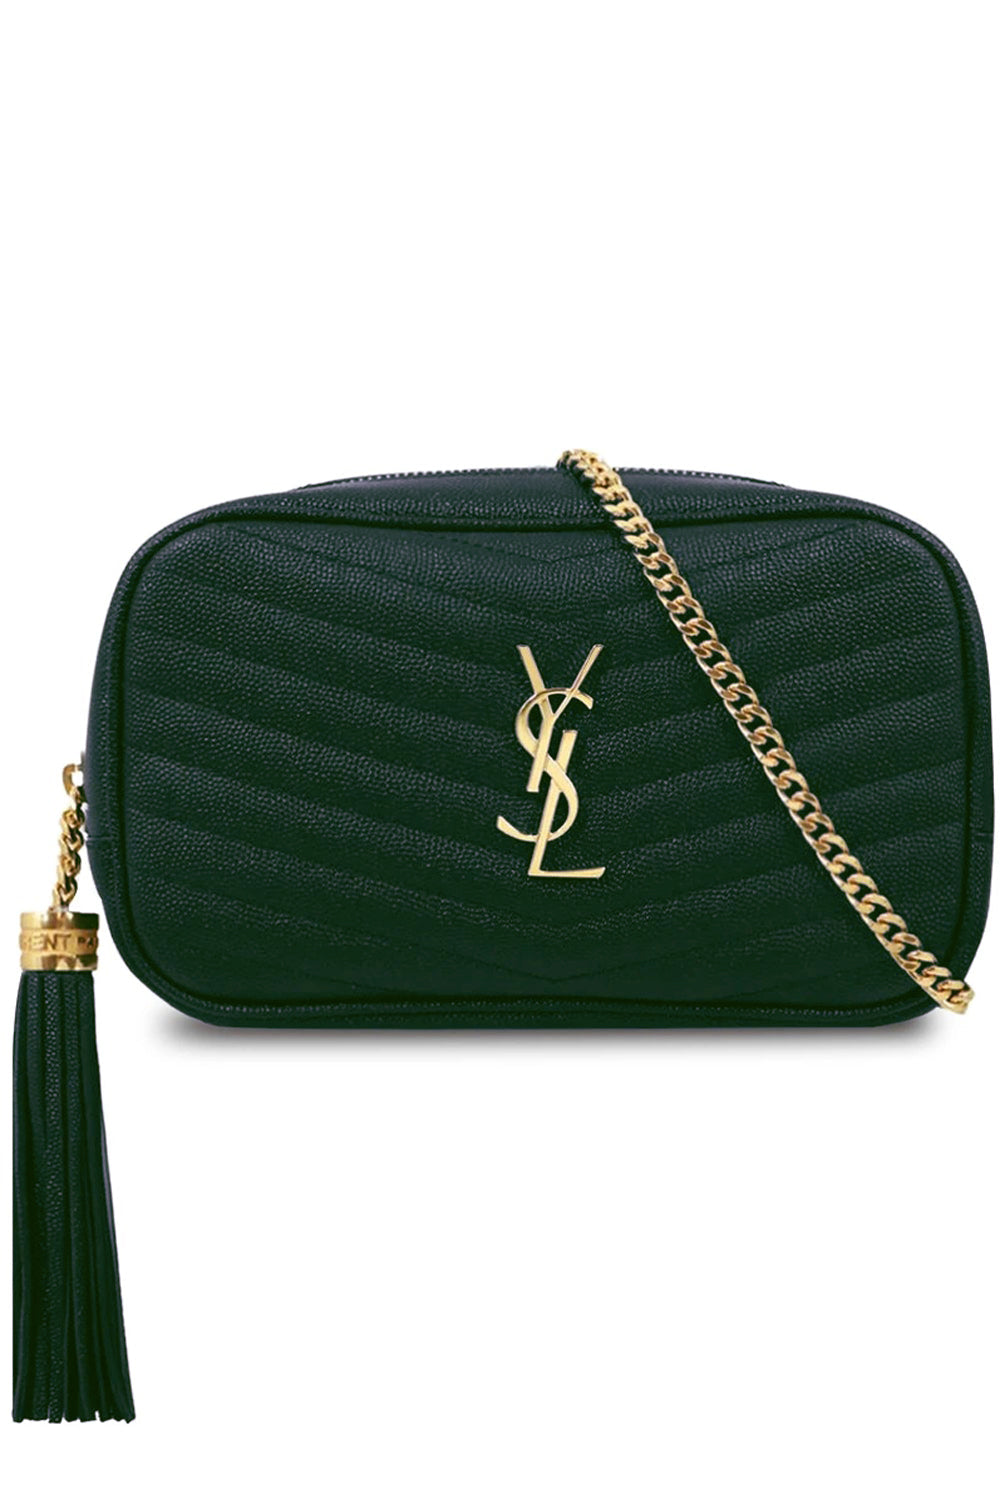 Saint Laurent YSL Monogram Large Pouch in Smooth Leather | Neiman Marcus